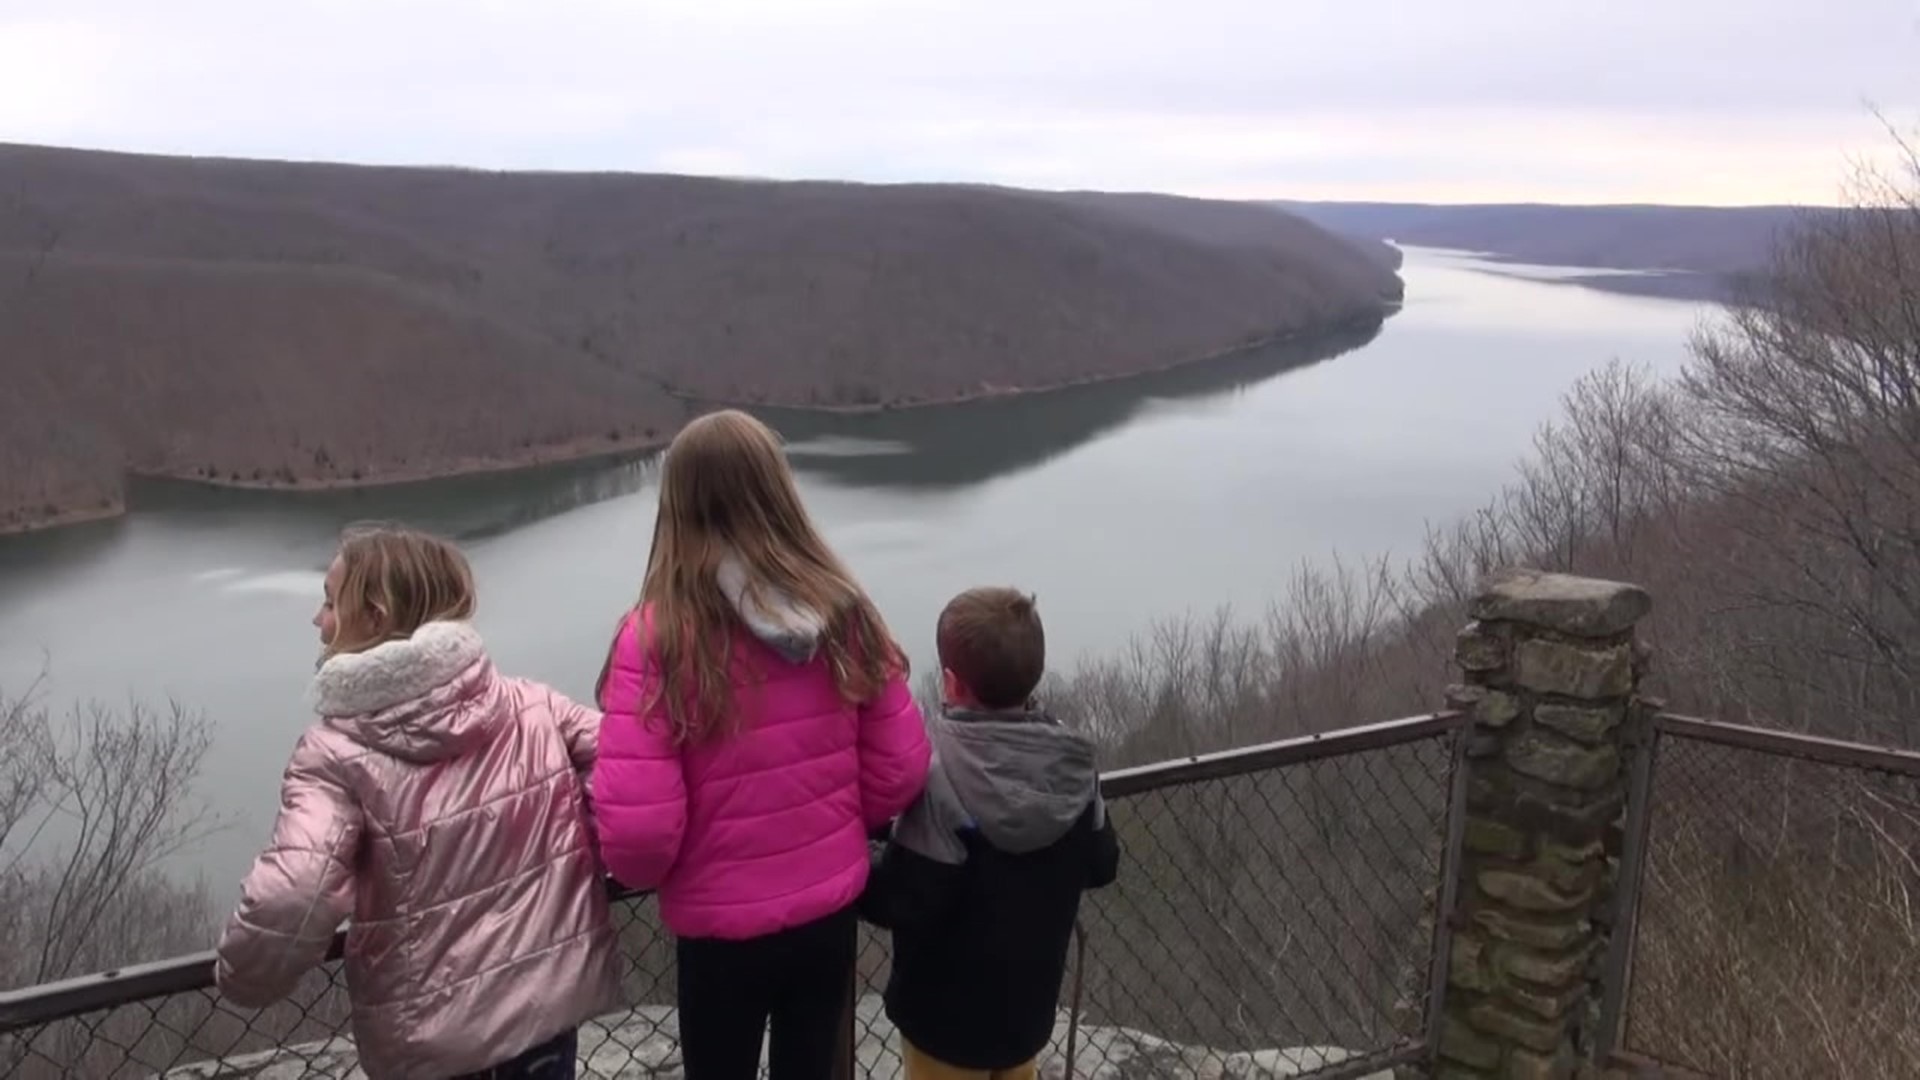 With the Meyer family as tour guides, we explore the Trails at Jakes Rocks, perched high above the Kinzua Reservoir in Warren County.